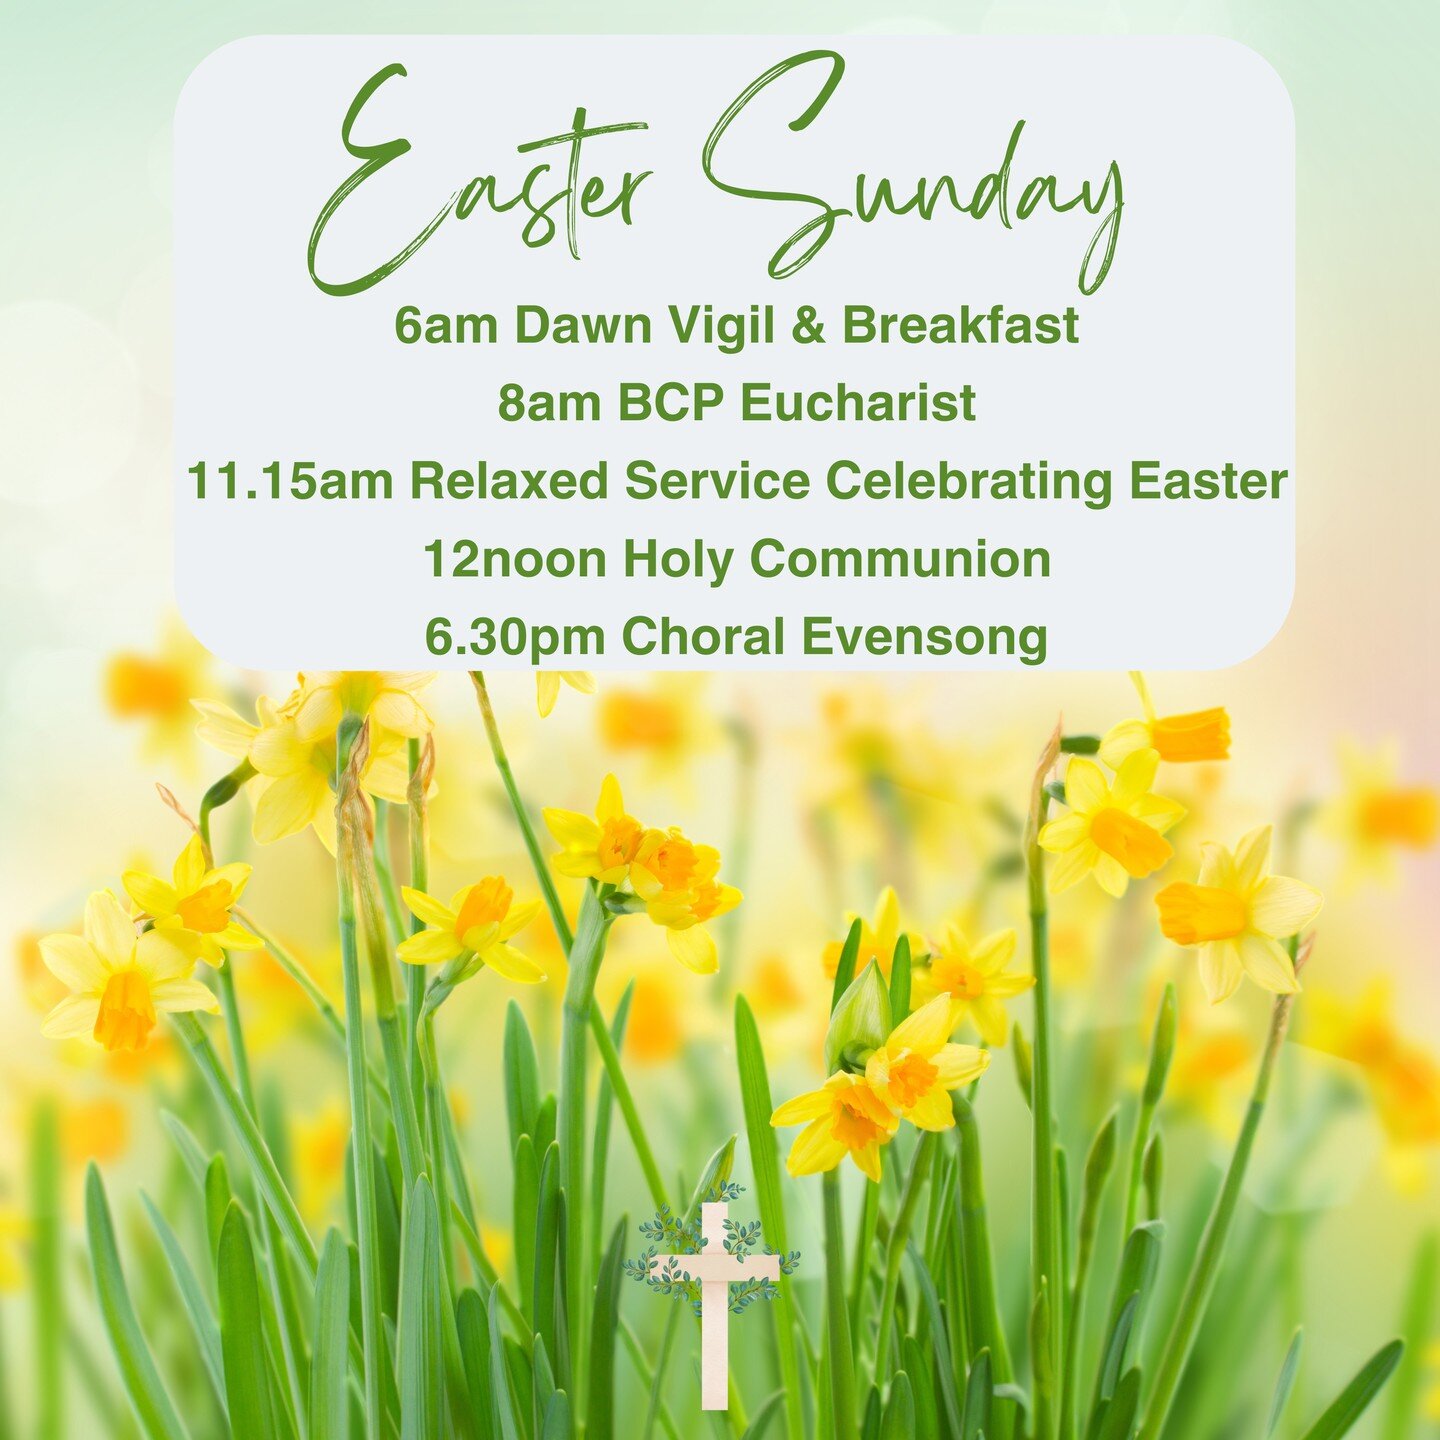 Everyone is welcome to #eastersunday at St Mary's #wimbledonvillage #easter #family #familyeaster #wimbledon